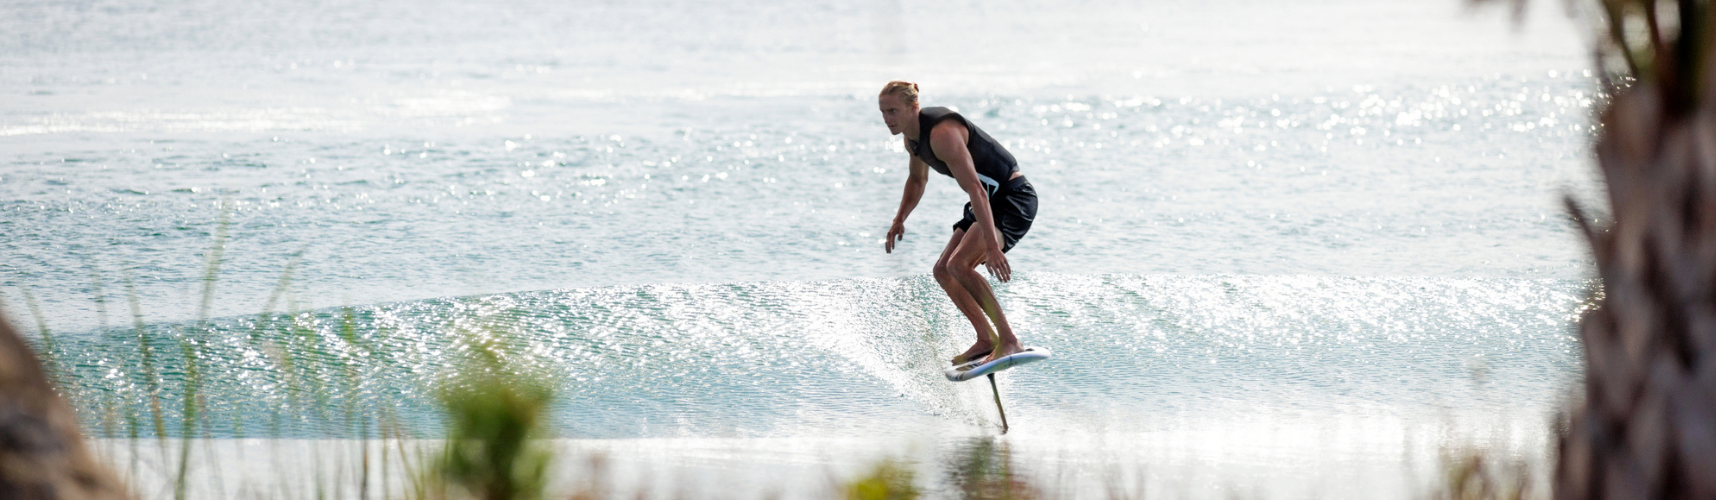 Man riding a Ronix Wake foil board in the ocean